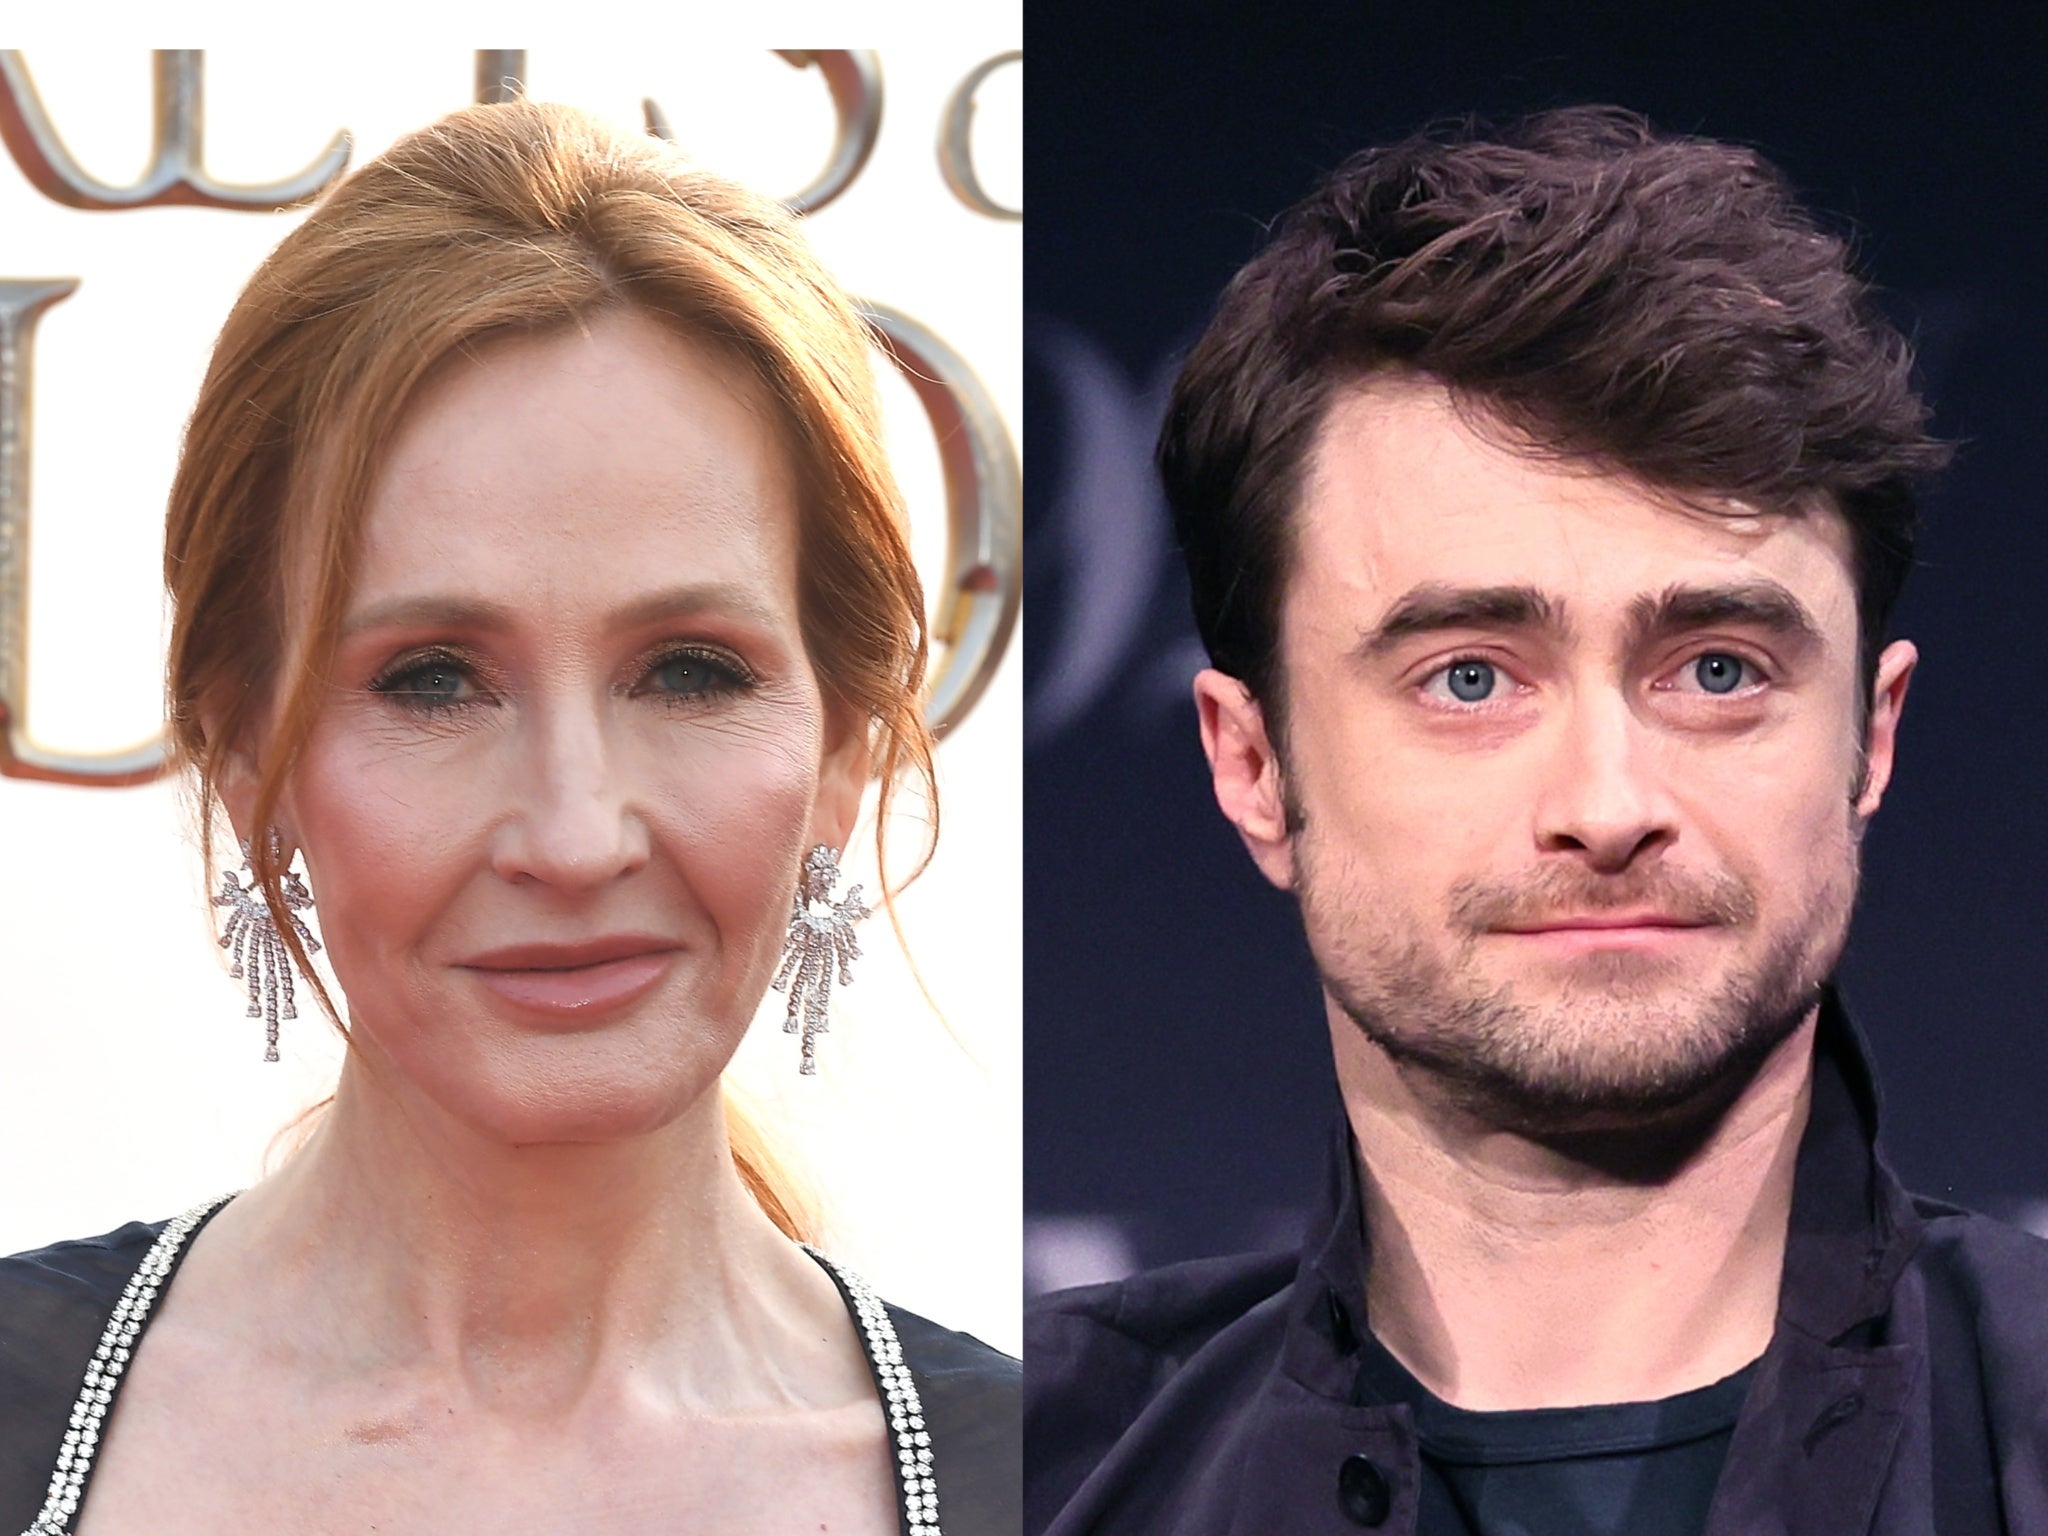 Radcliffe condemned Rowling’s comments